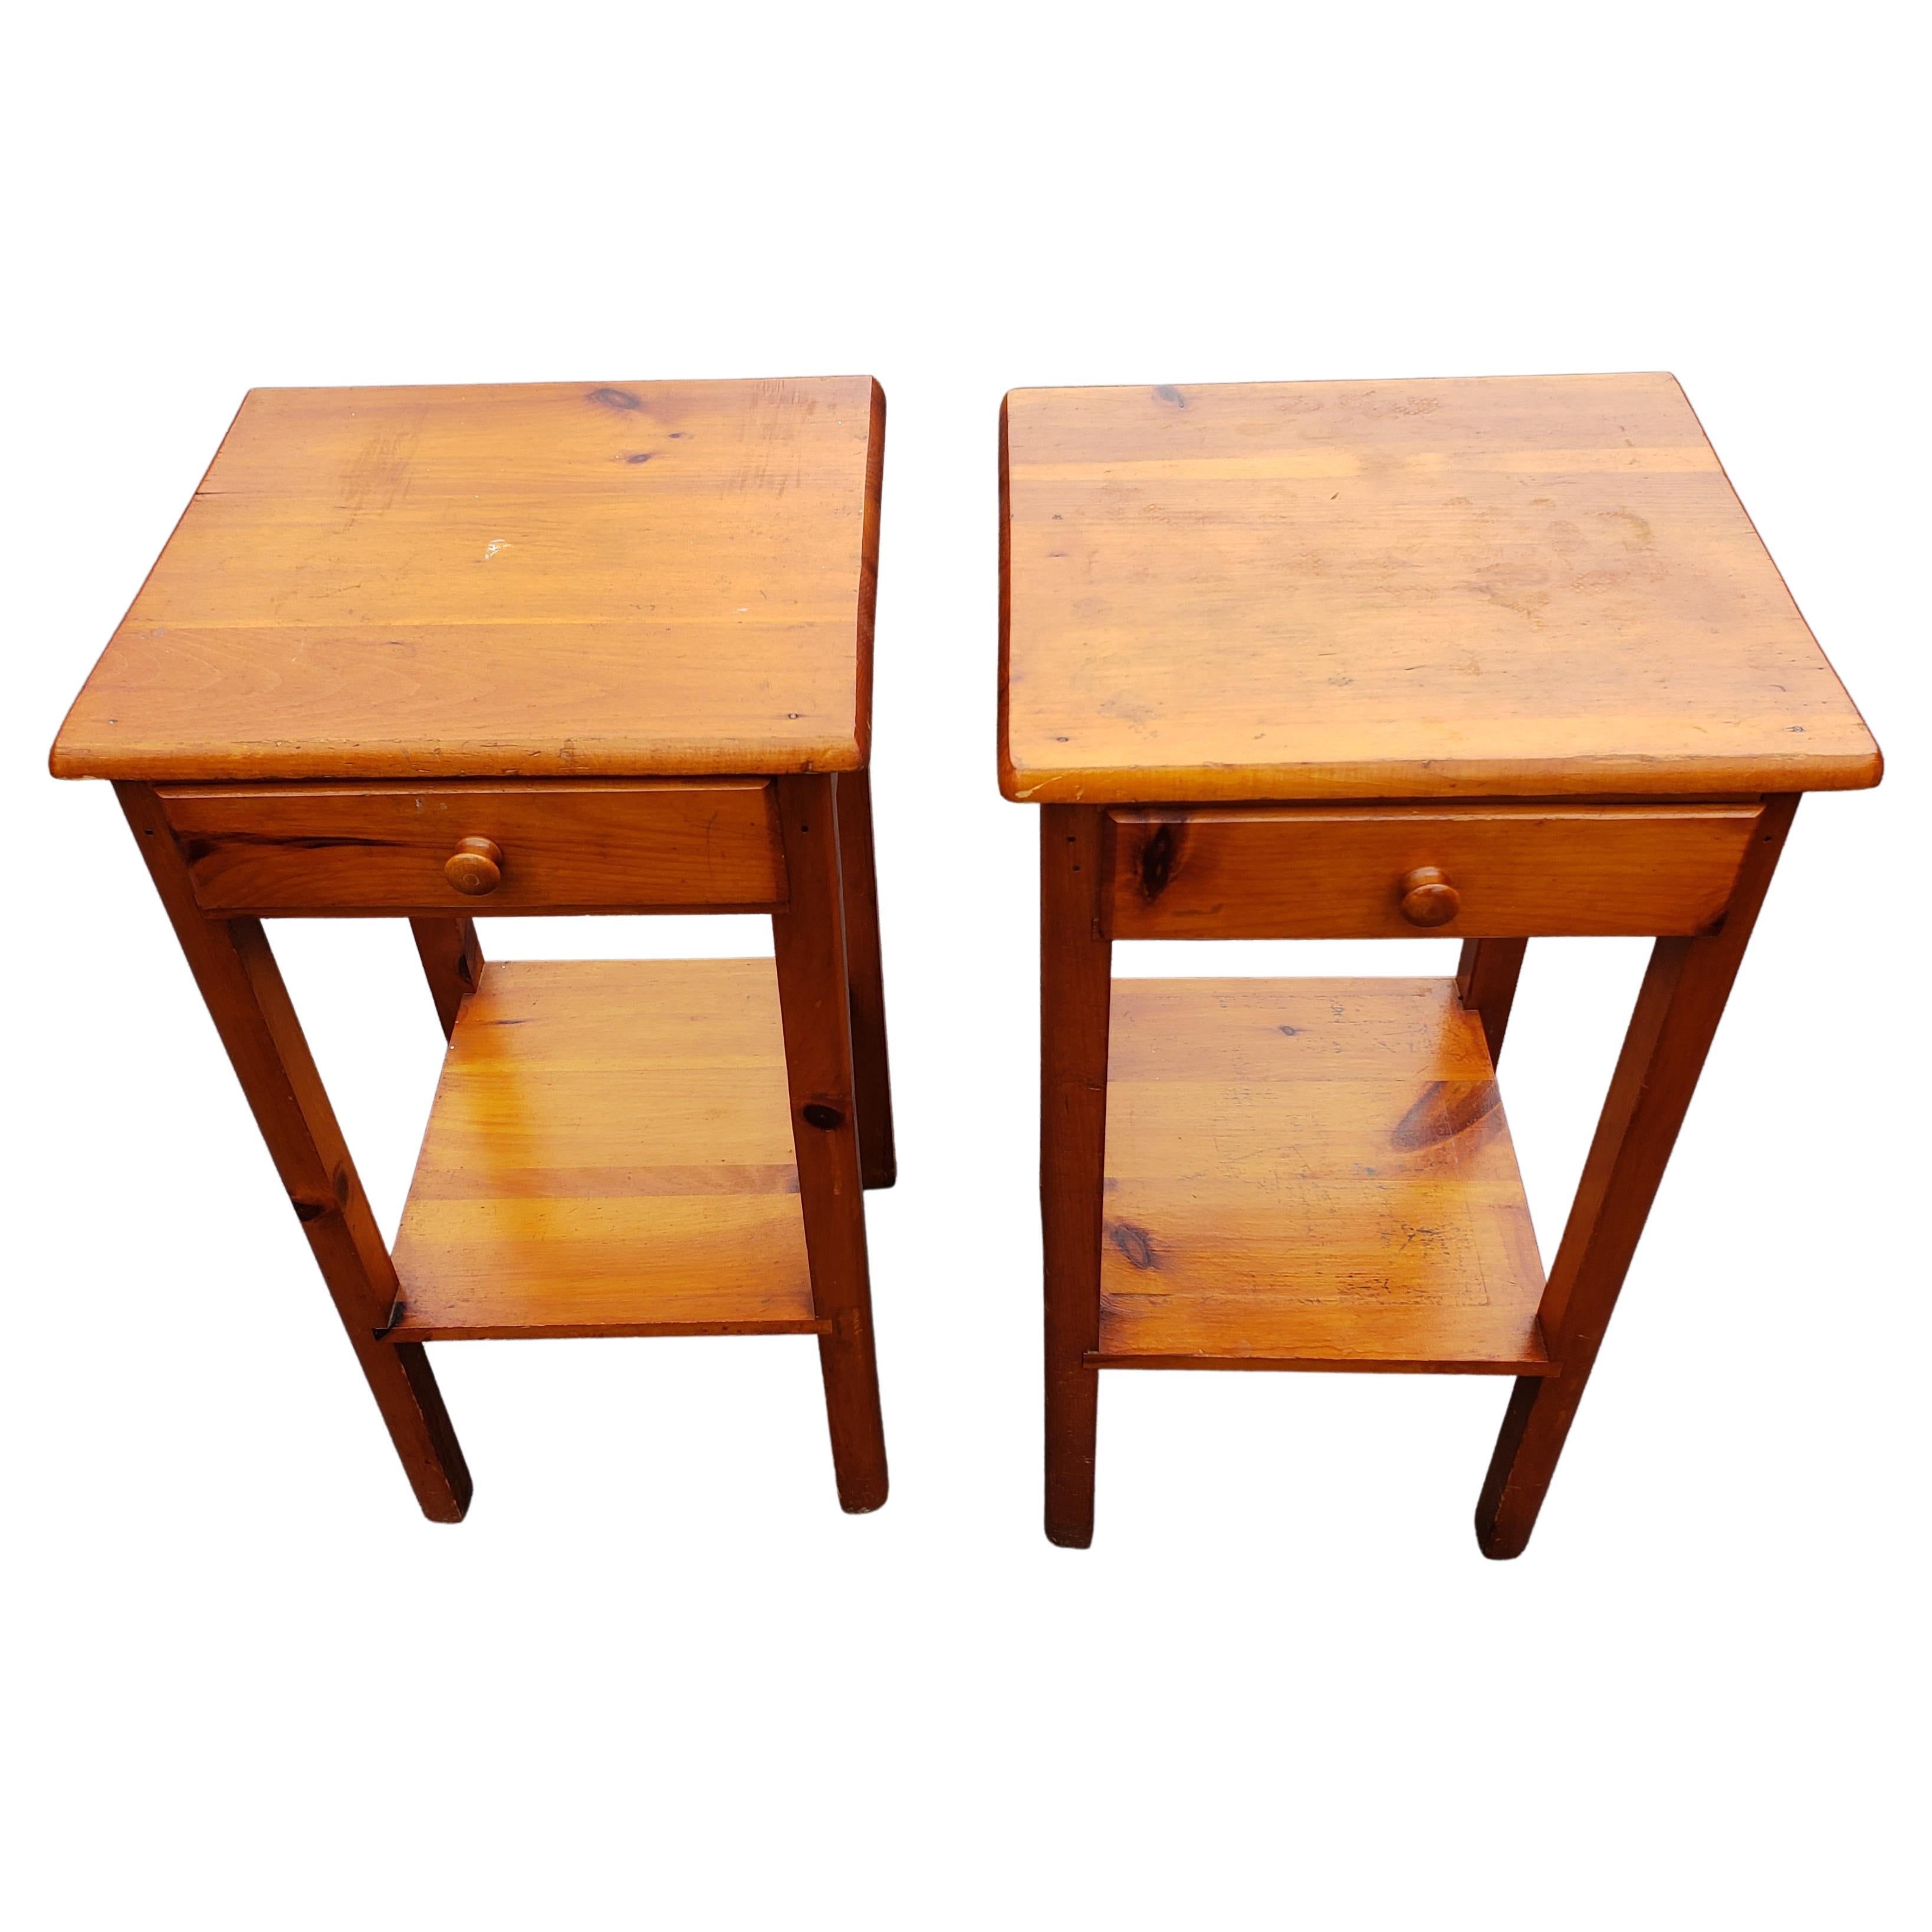 20th Century Vintage Solid Pine Tables, Sides or Nightstands, Circa 1970s, a Pair